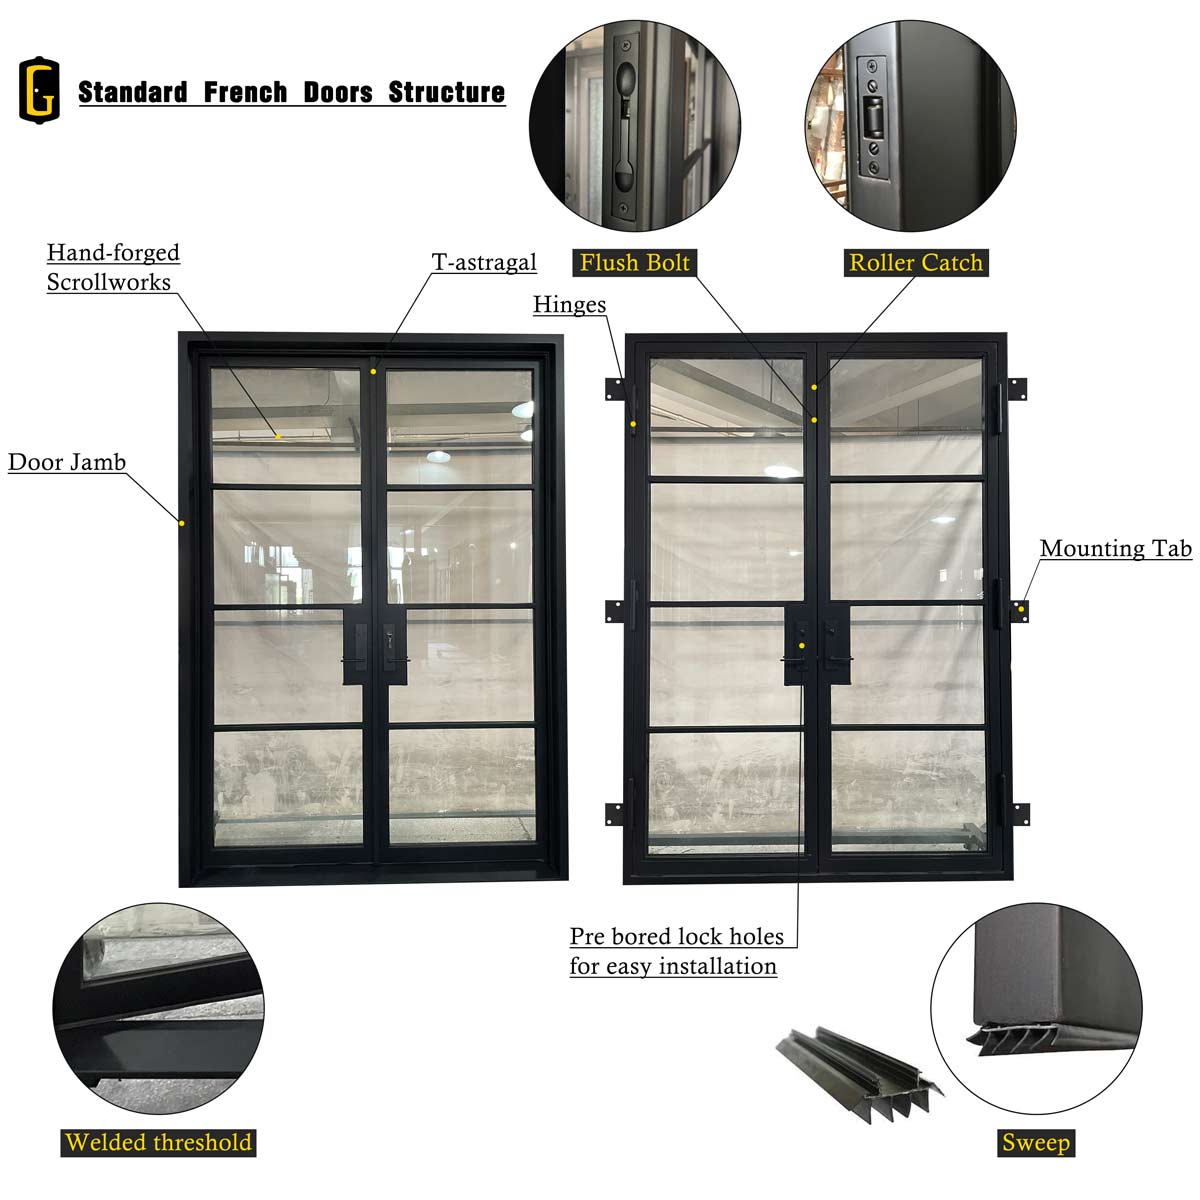 GID Steel French Double Door with Tempered Glass Square Top FD109